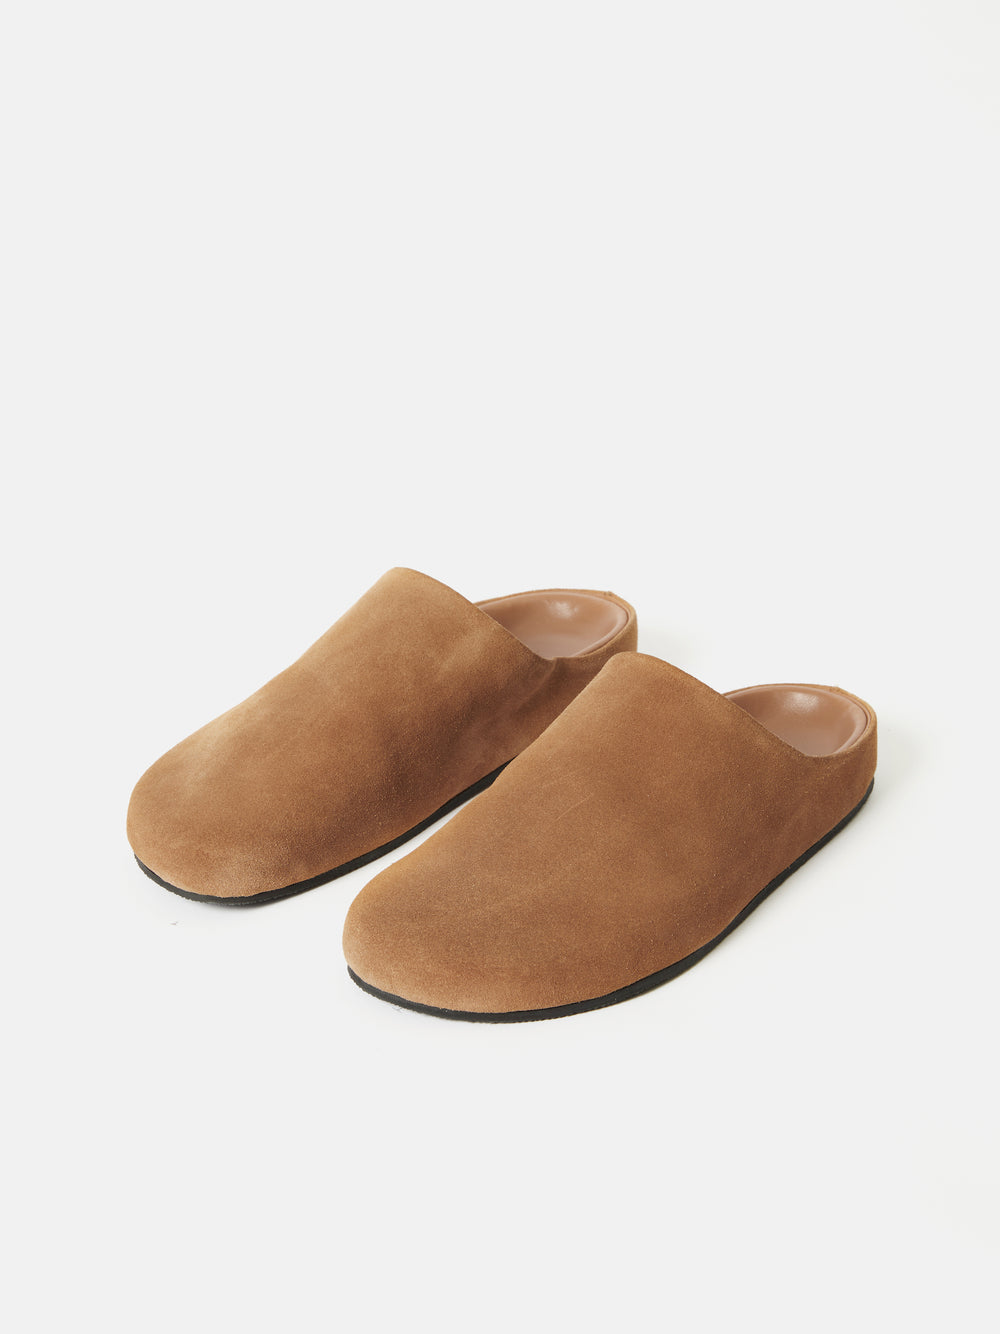 Clogs are trending right now! 13 to shop from Birkenstock, M&S